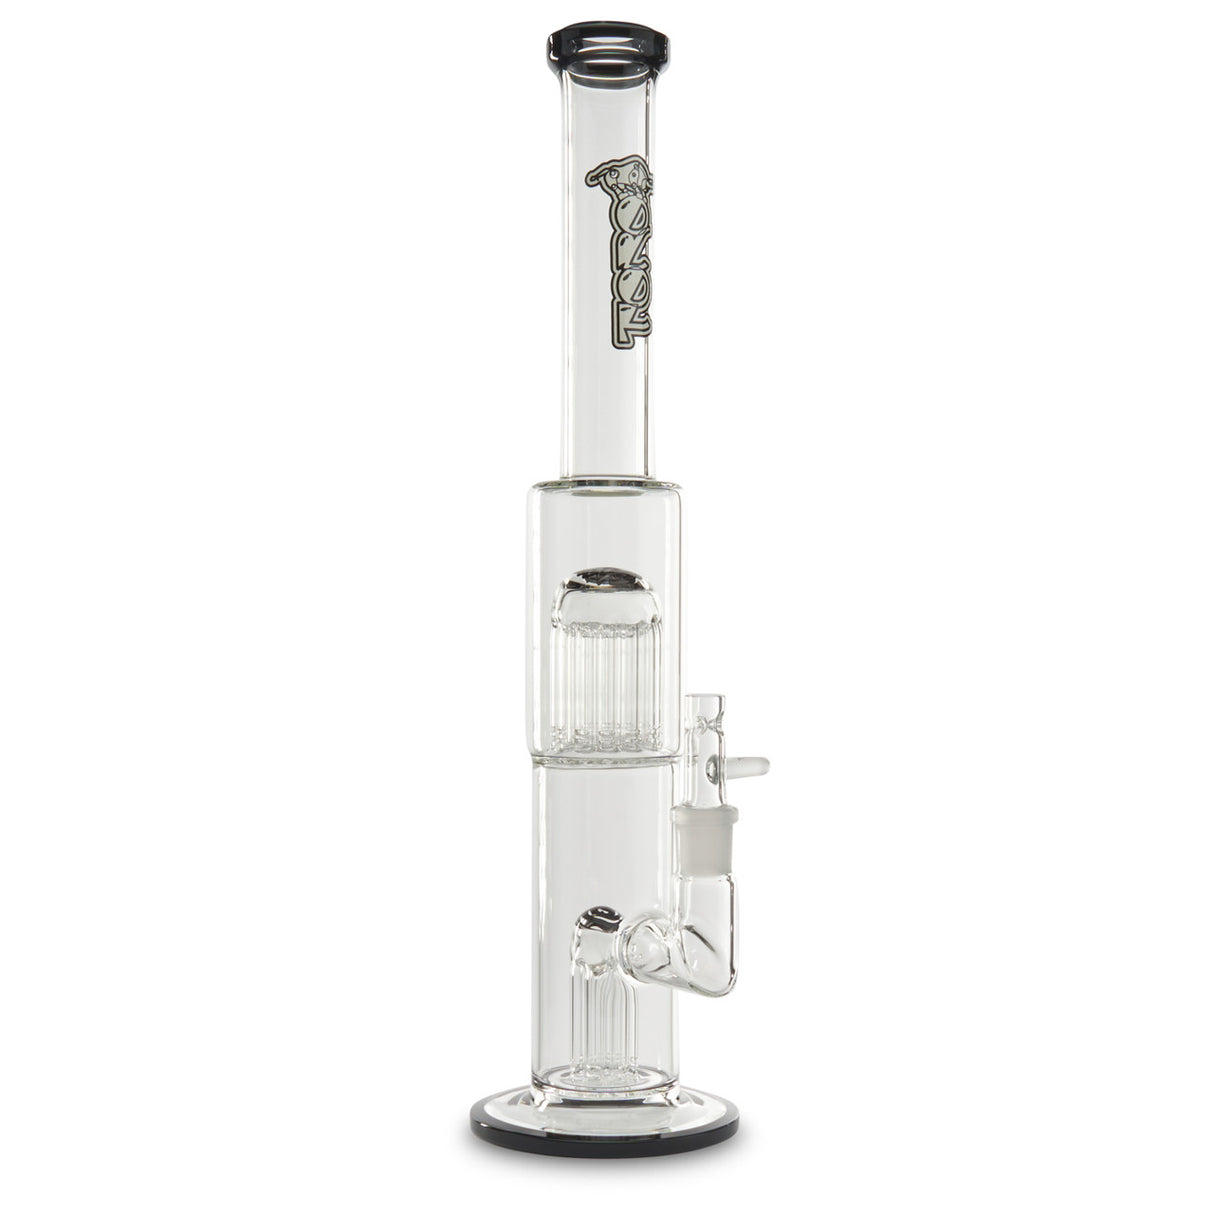 toro glass 7 to 13 full size jet black with wig wag cap water pipe online